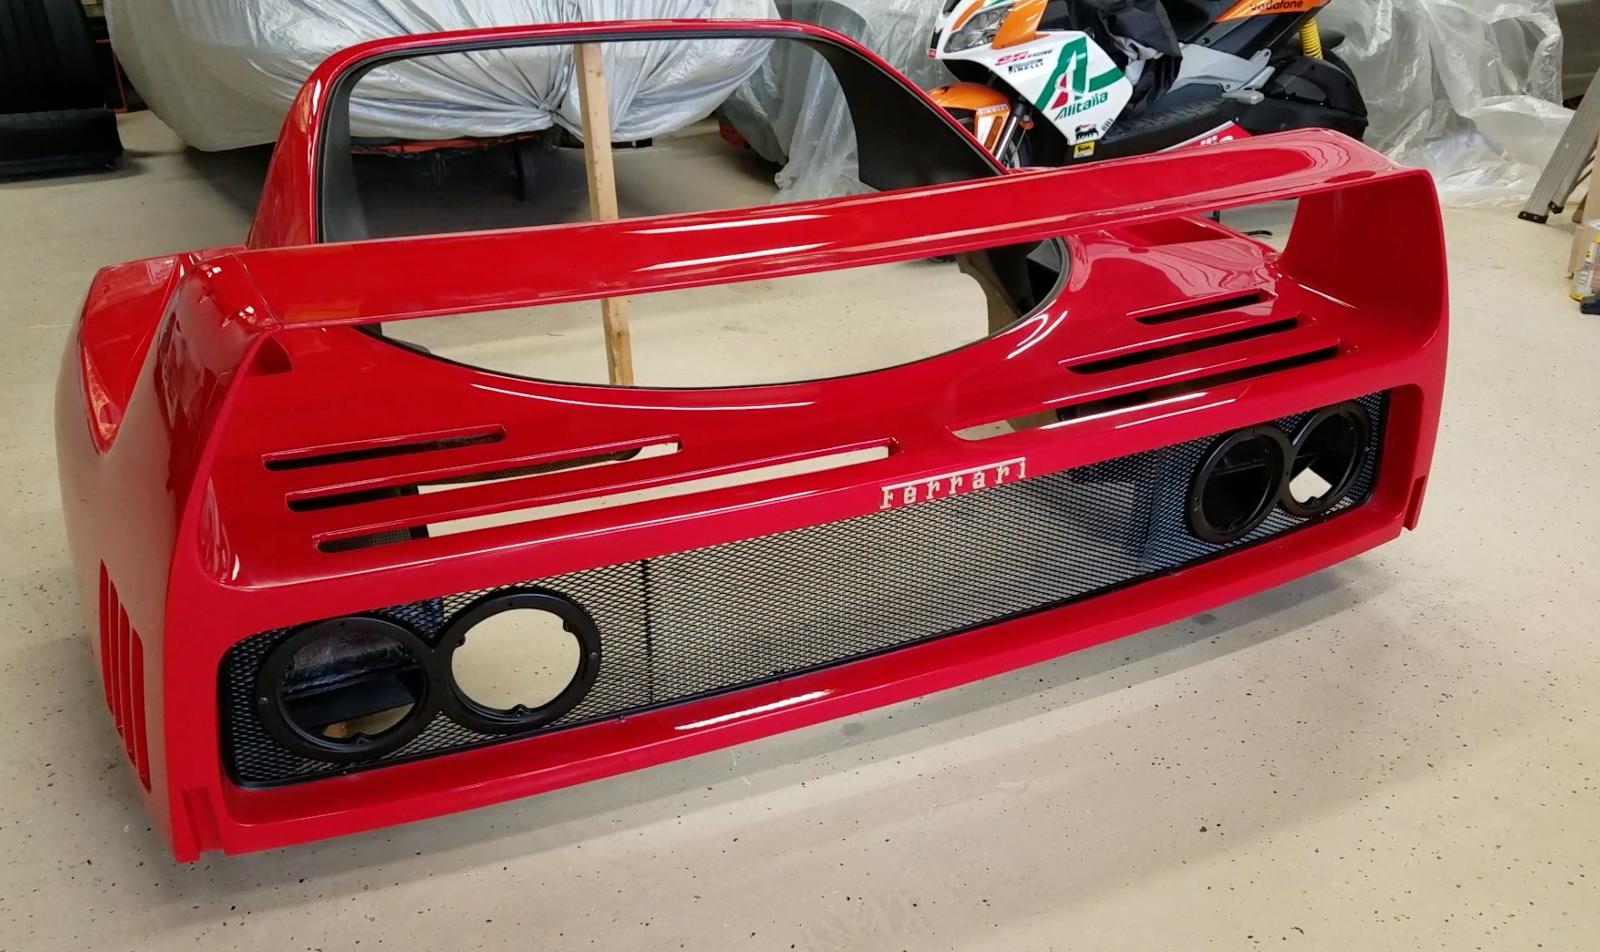 Ferrari F40 Rear Bonnet OEM With Wing and rear Grill